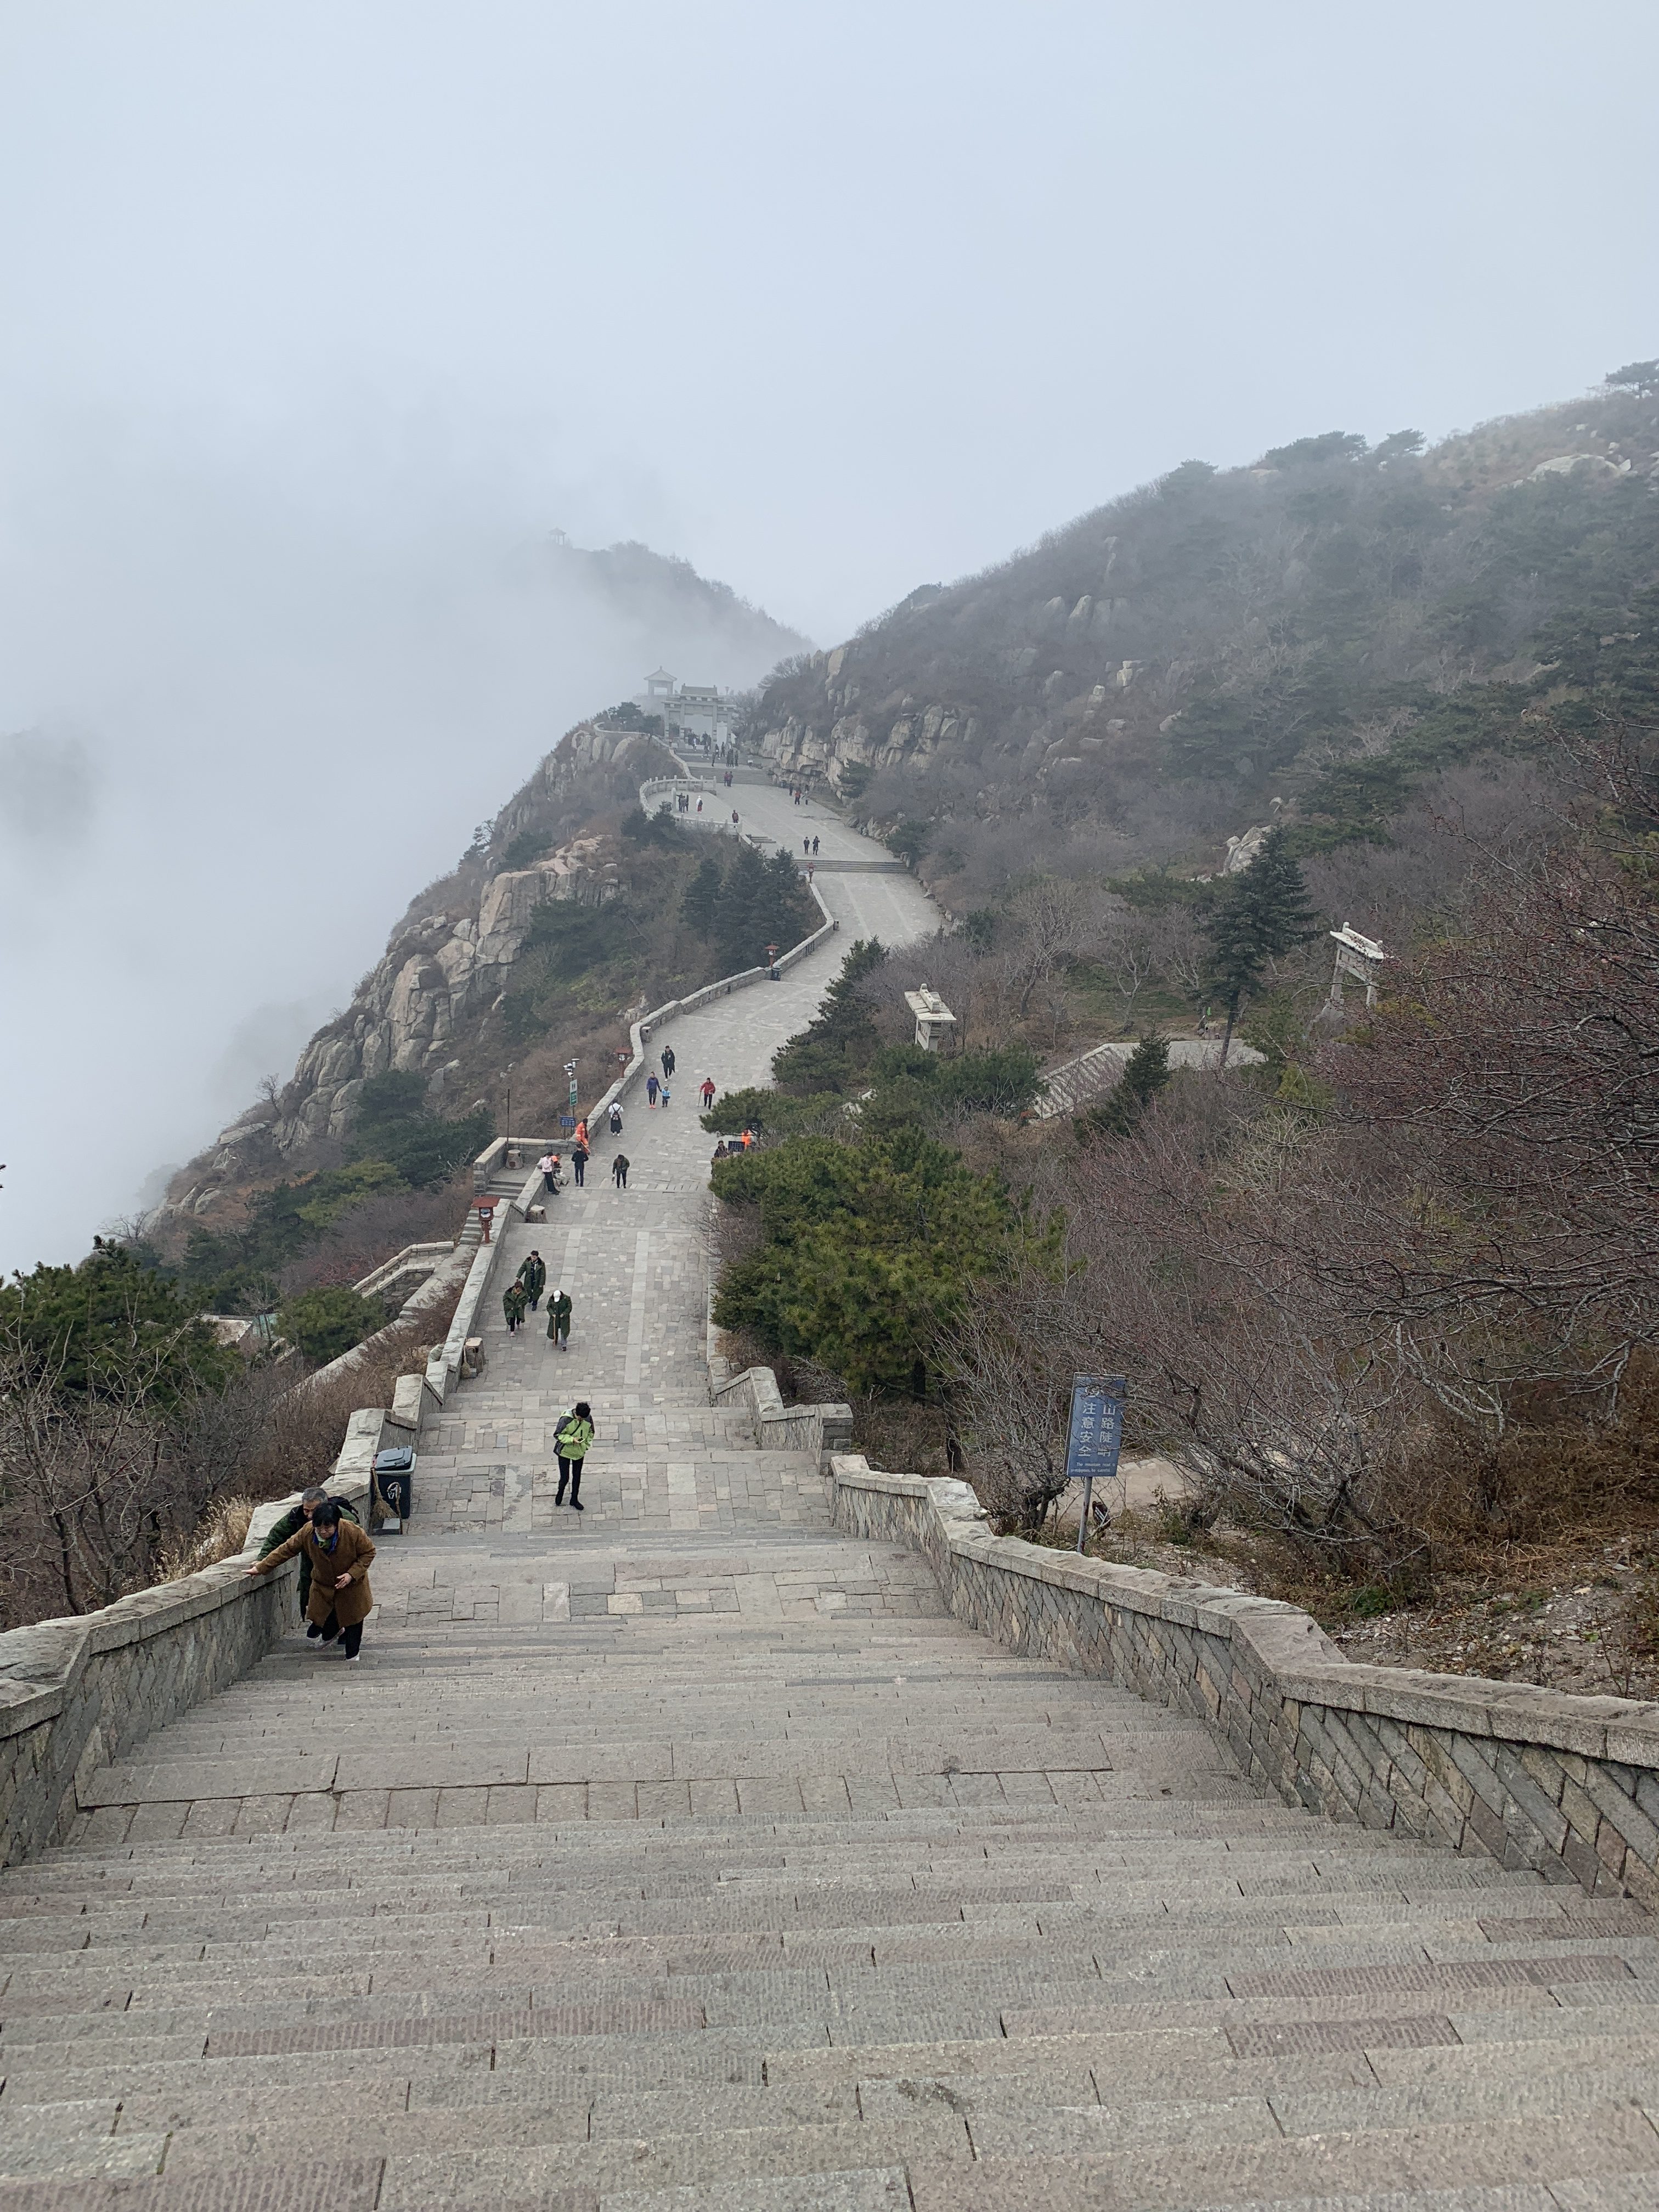 Shandong wall with people walking